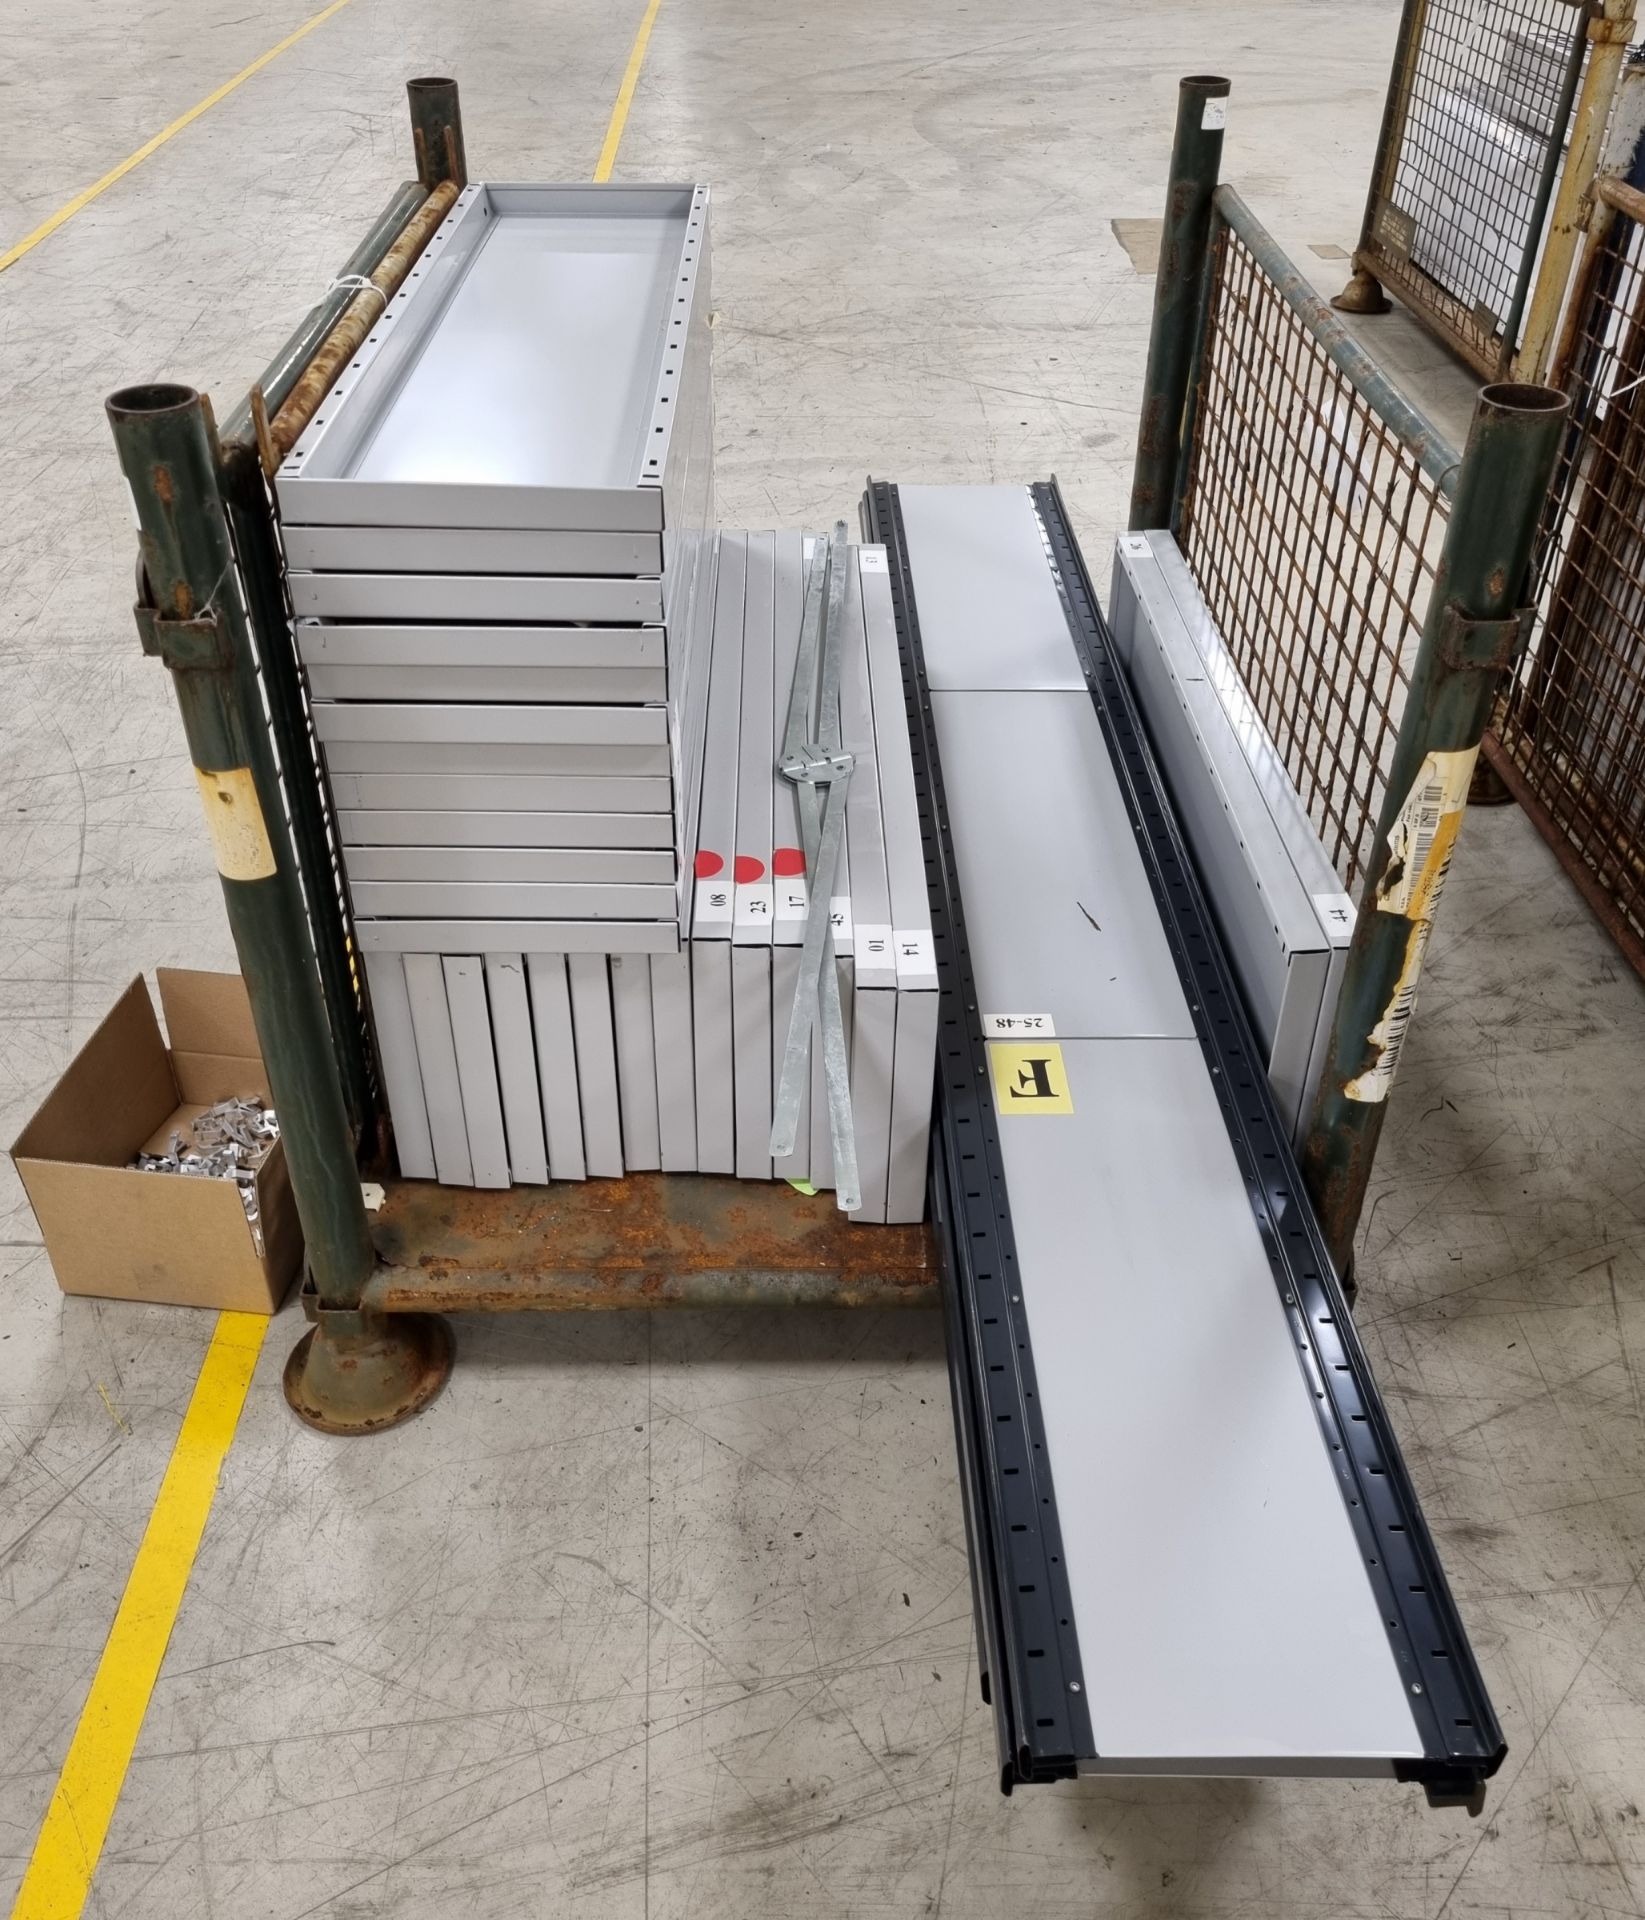 2x sets of Industrial 4 bay shelving assemblies - see description for details - Image 5 of 6